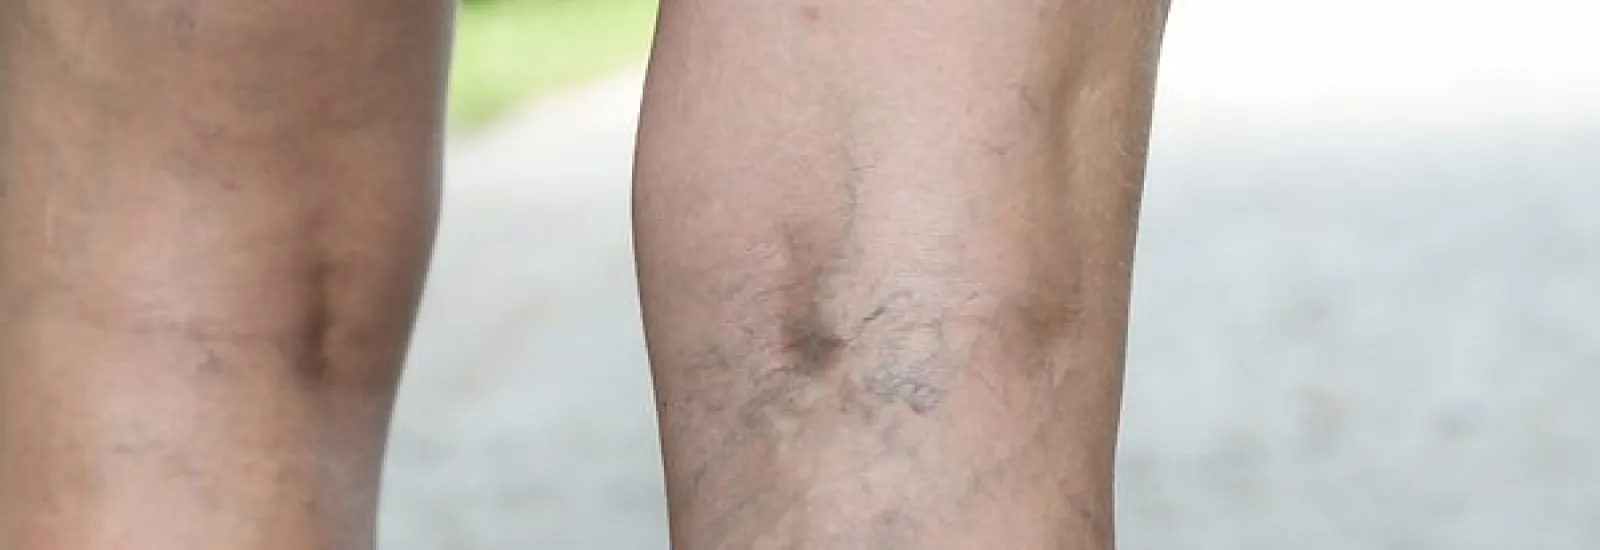 Onlyfans varicose veins inside the penis Porno gratuit